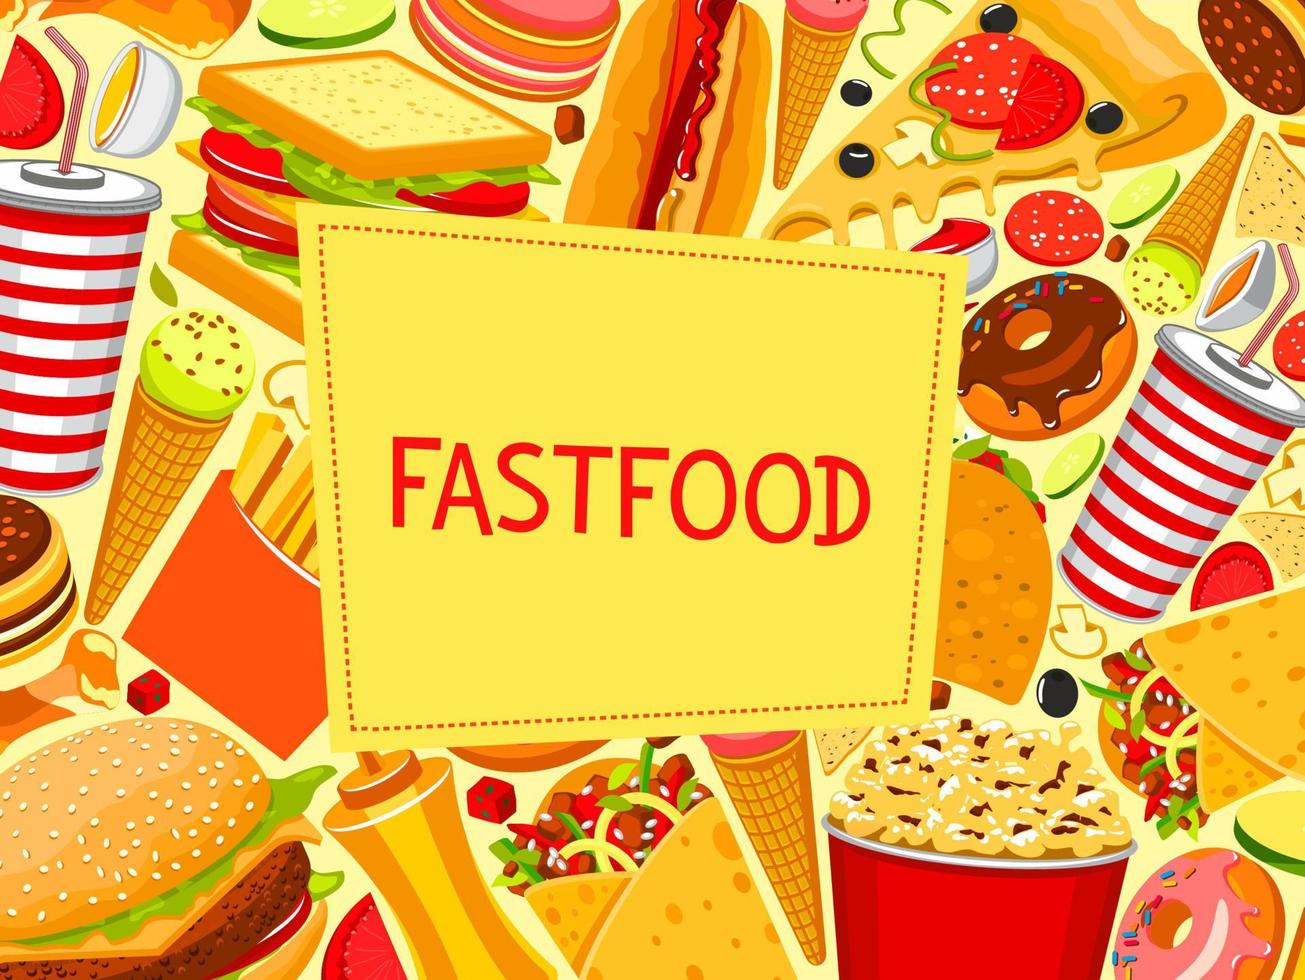 Fast food burger and sandwich vector menu poster